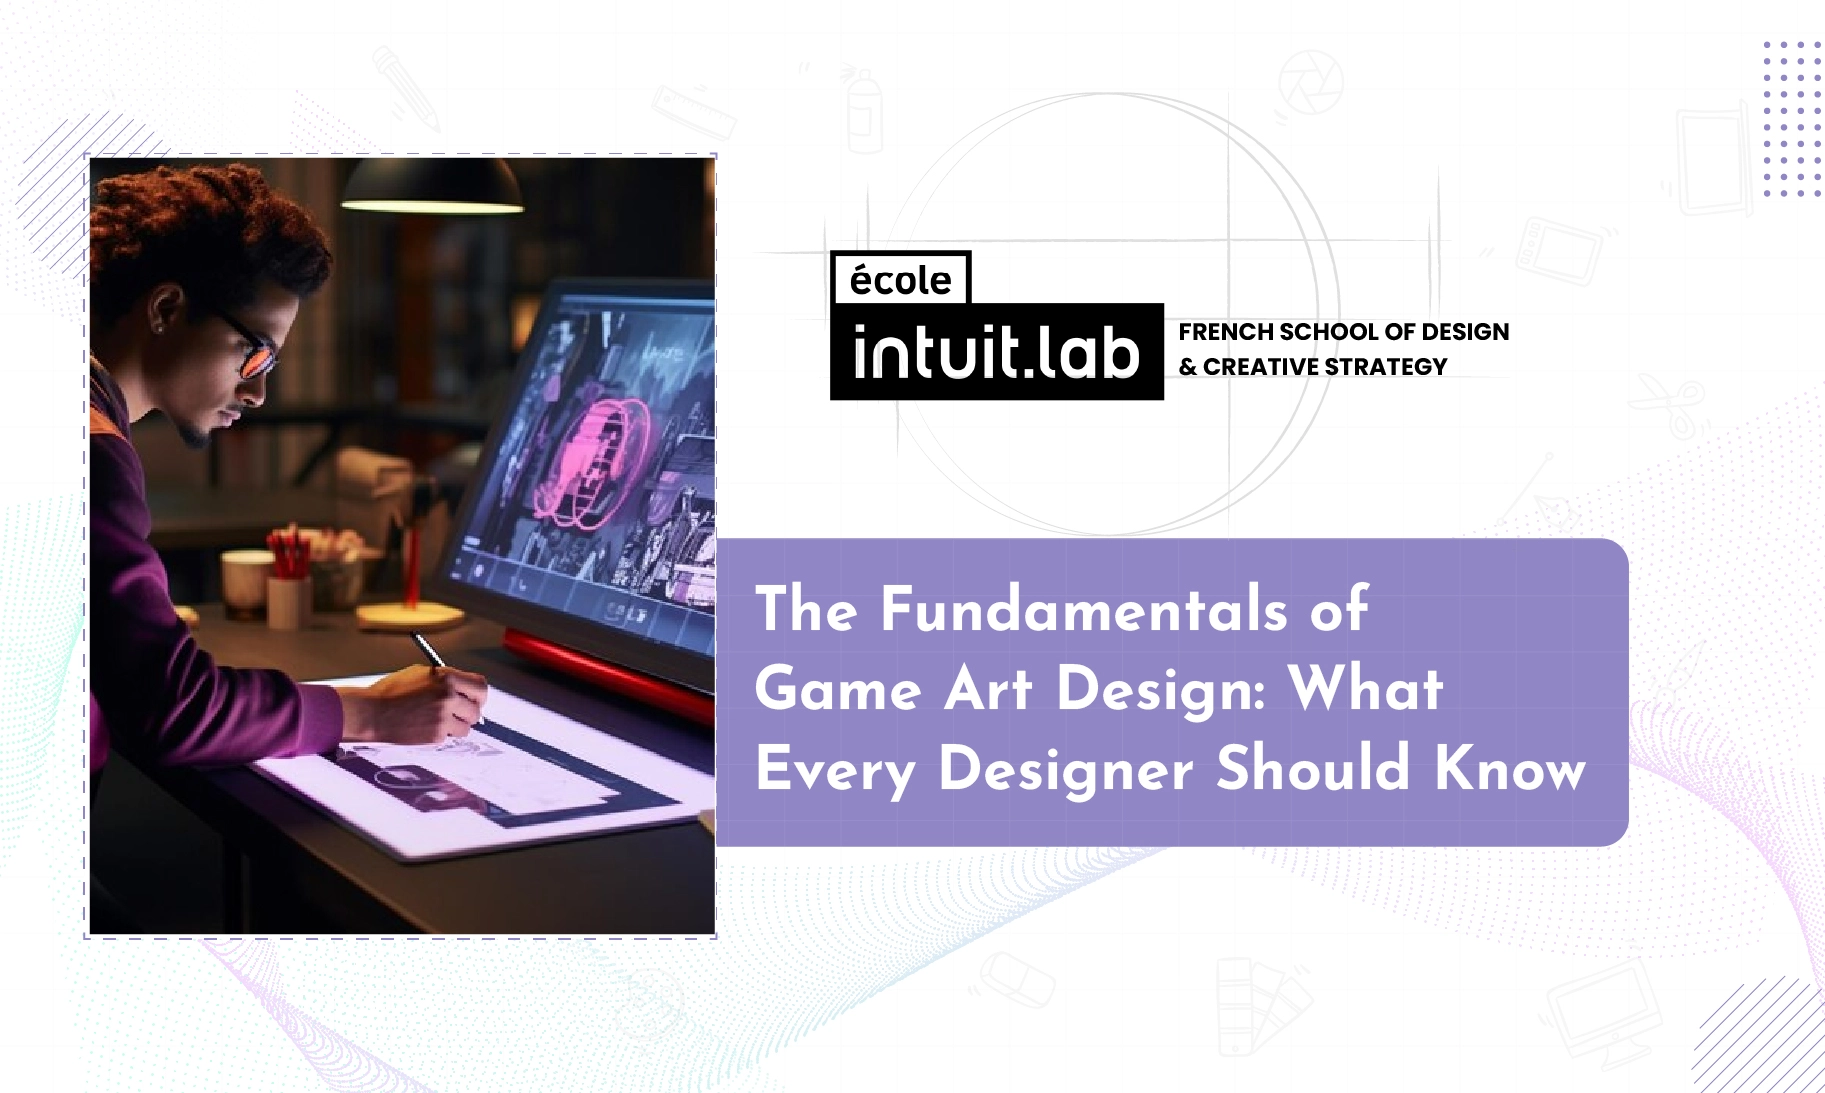 The Fundamentals of Game Art Design: What Every Designer Should Know